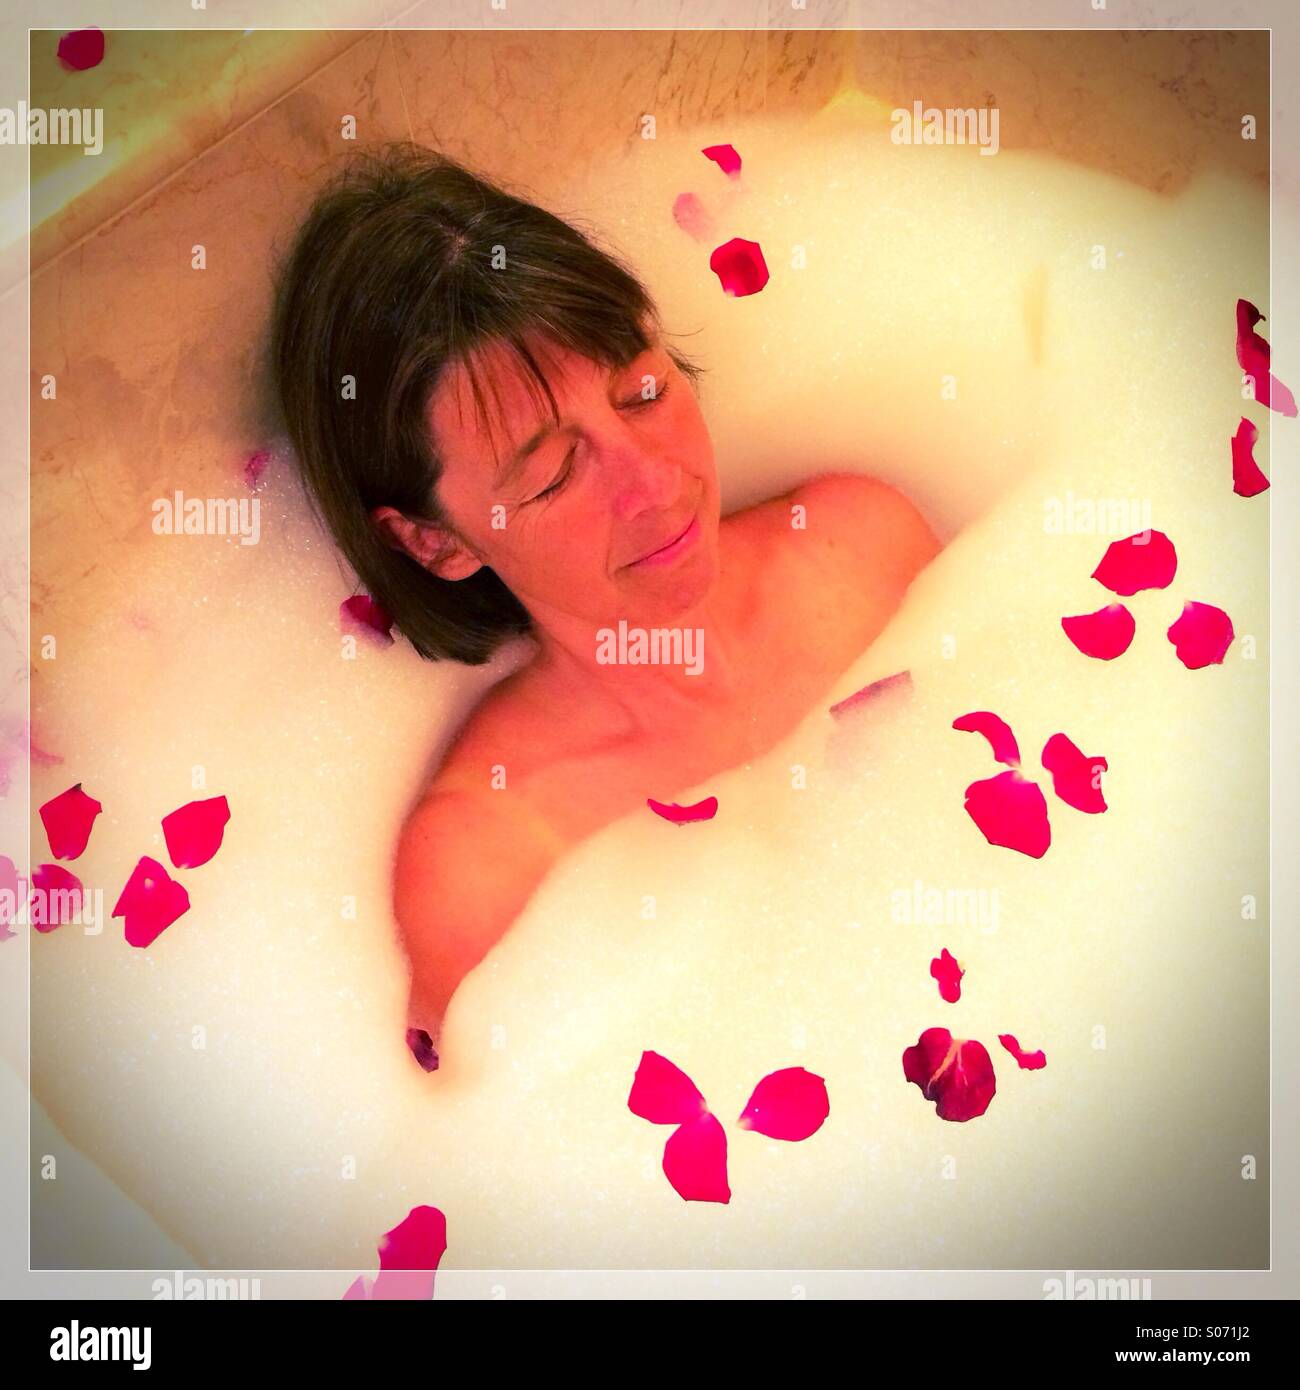 Attractive lady lying in bath with rose petals Stock Photo by NomadSoul1